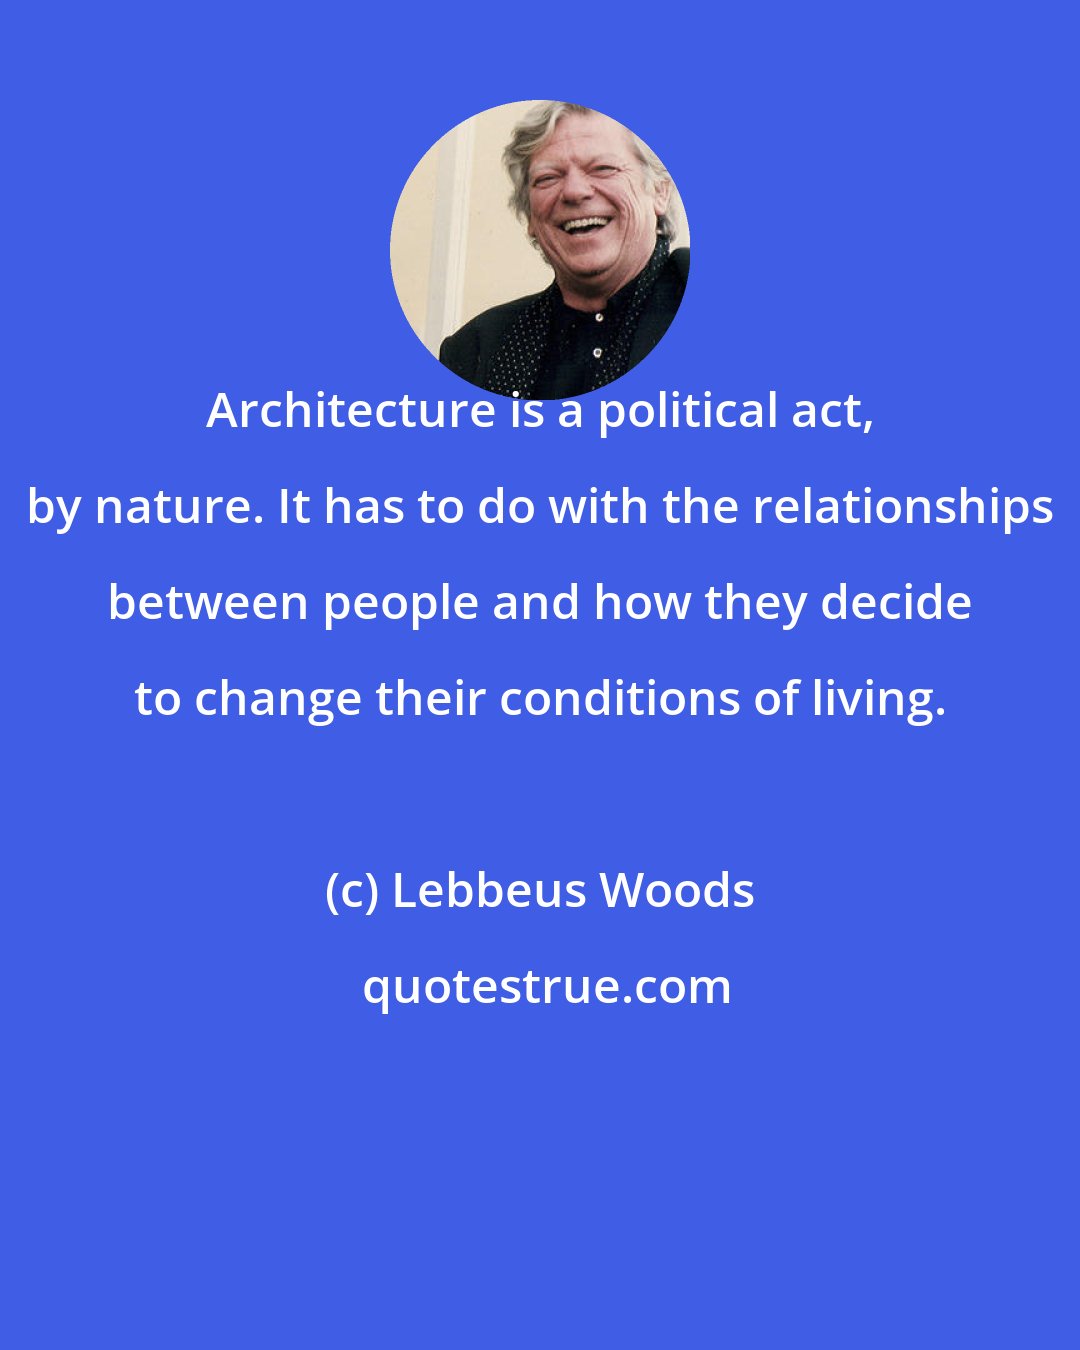 Lebbeus Woods: Architecture is a political act, by nature. It has to do with the relationships between people and how they decide to change their conditions of living.